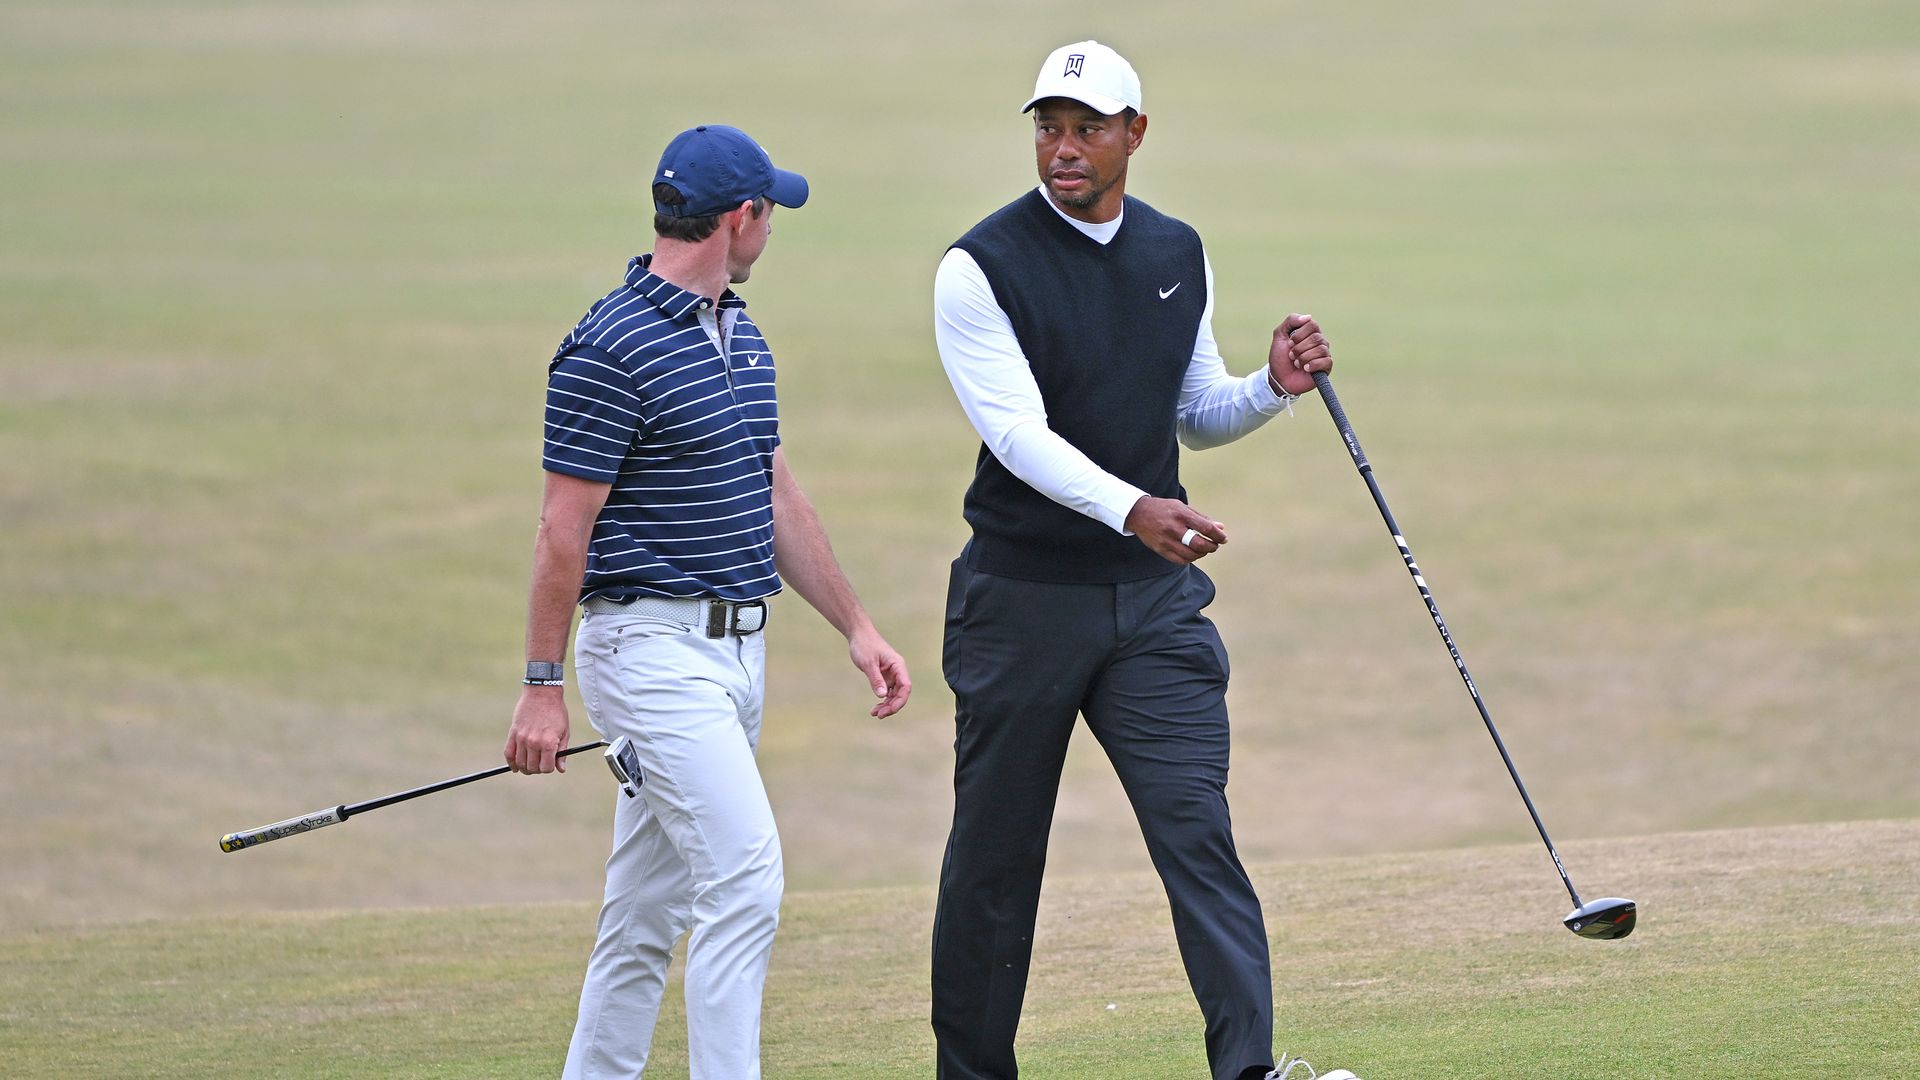 Tiger Woods and Rory McIlroy at a golf event.